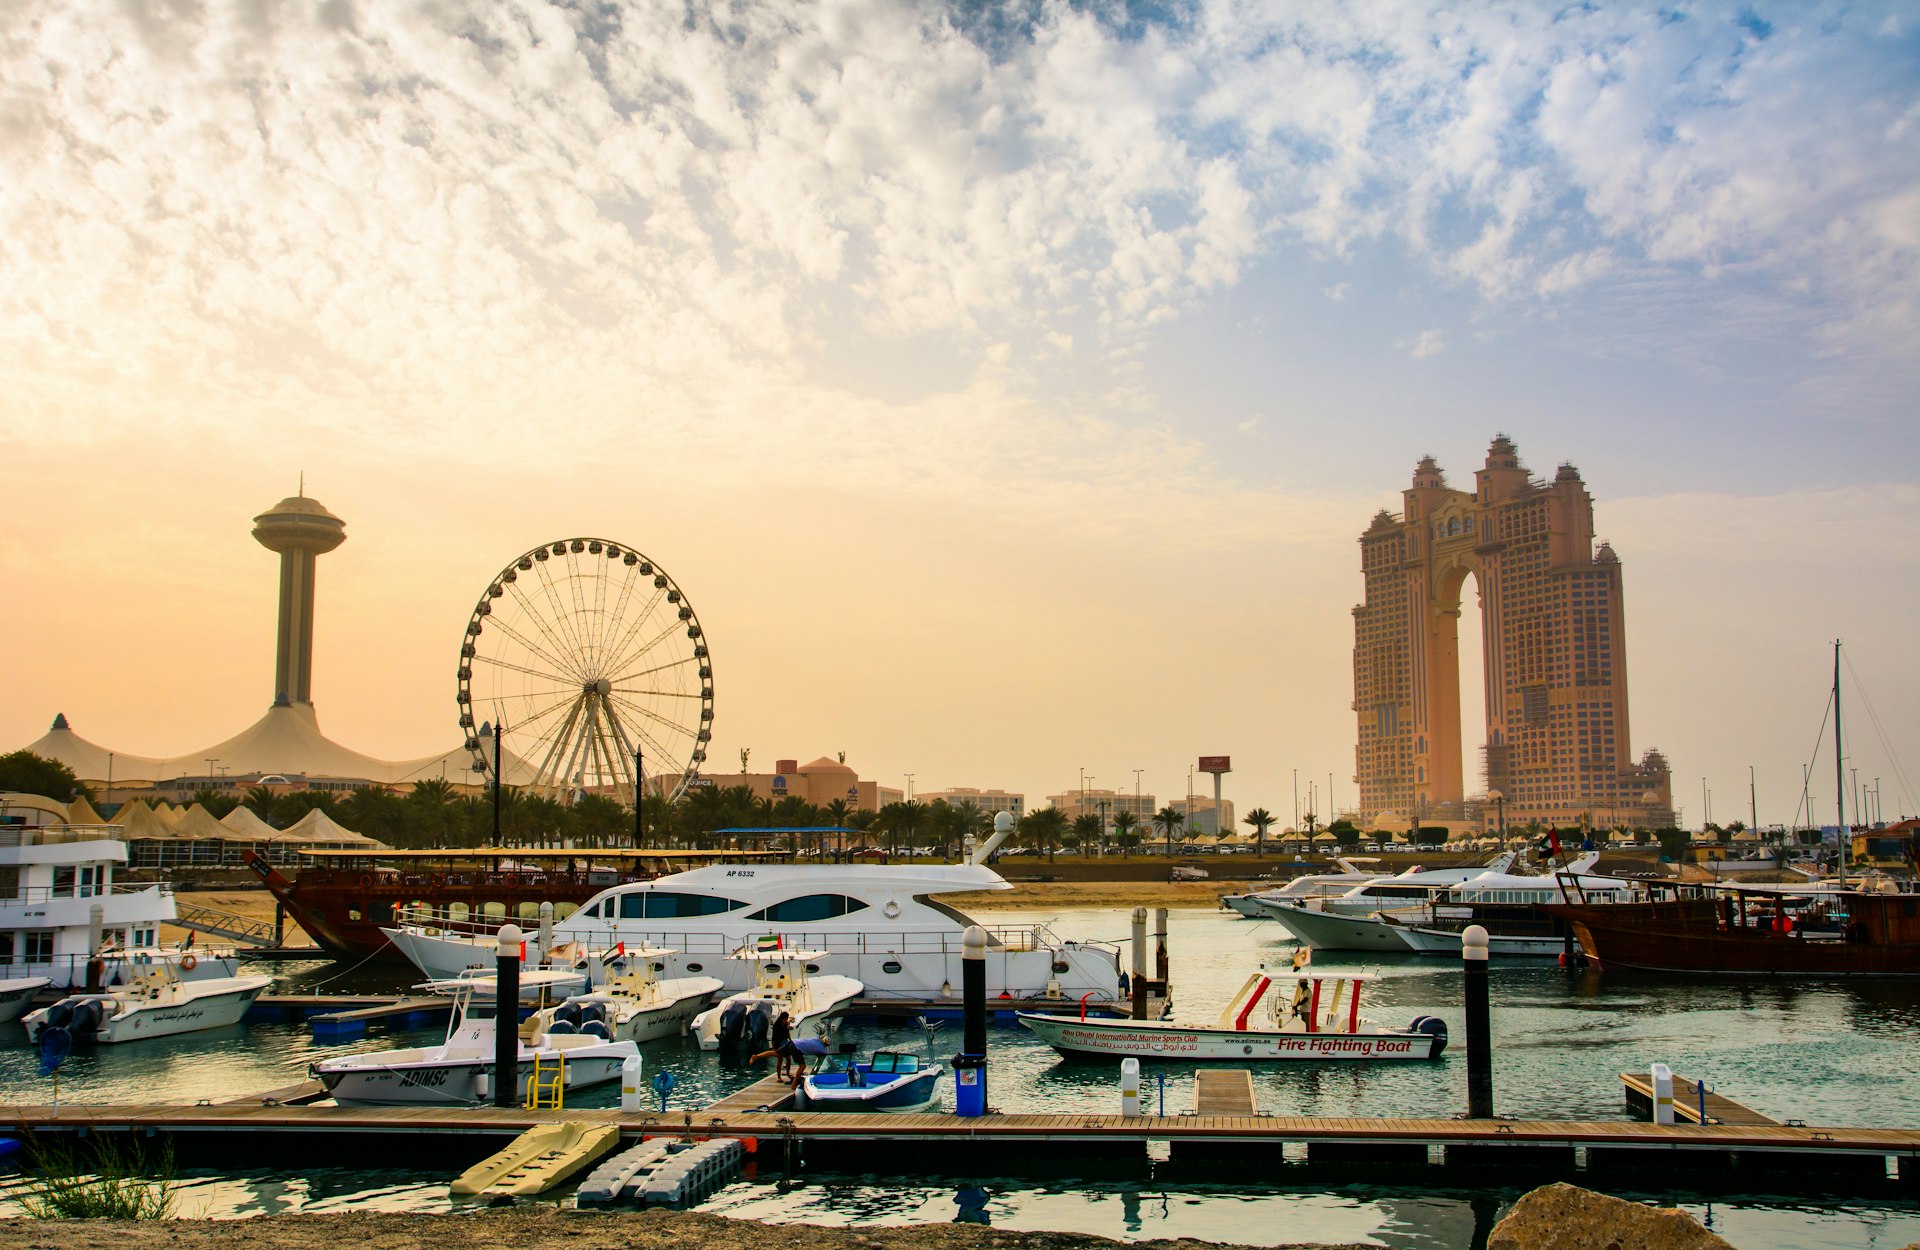 Sunset over an island with a Ferris wheel, large hotel and luxury boats in the dock